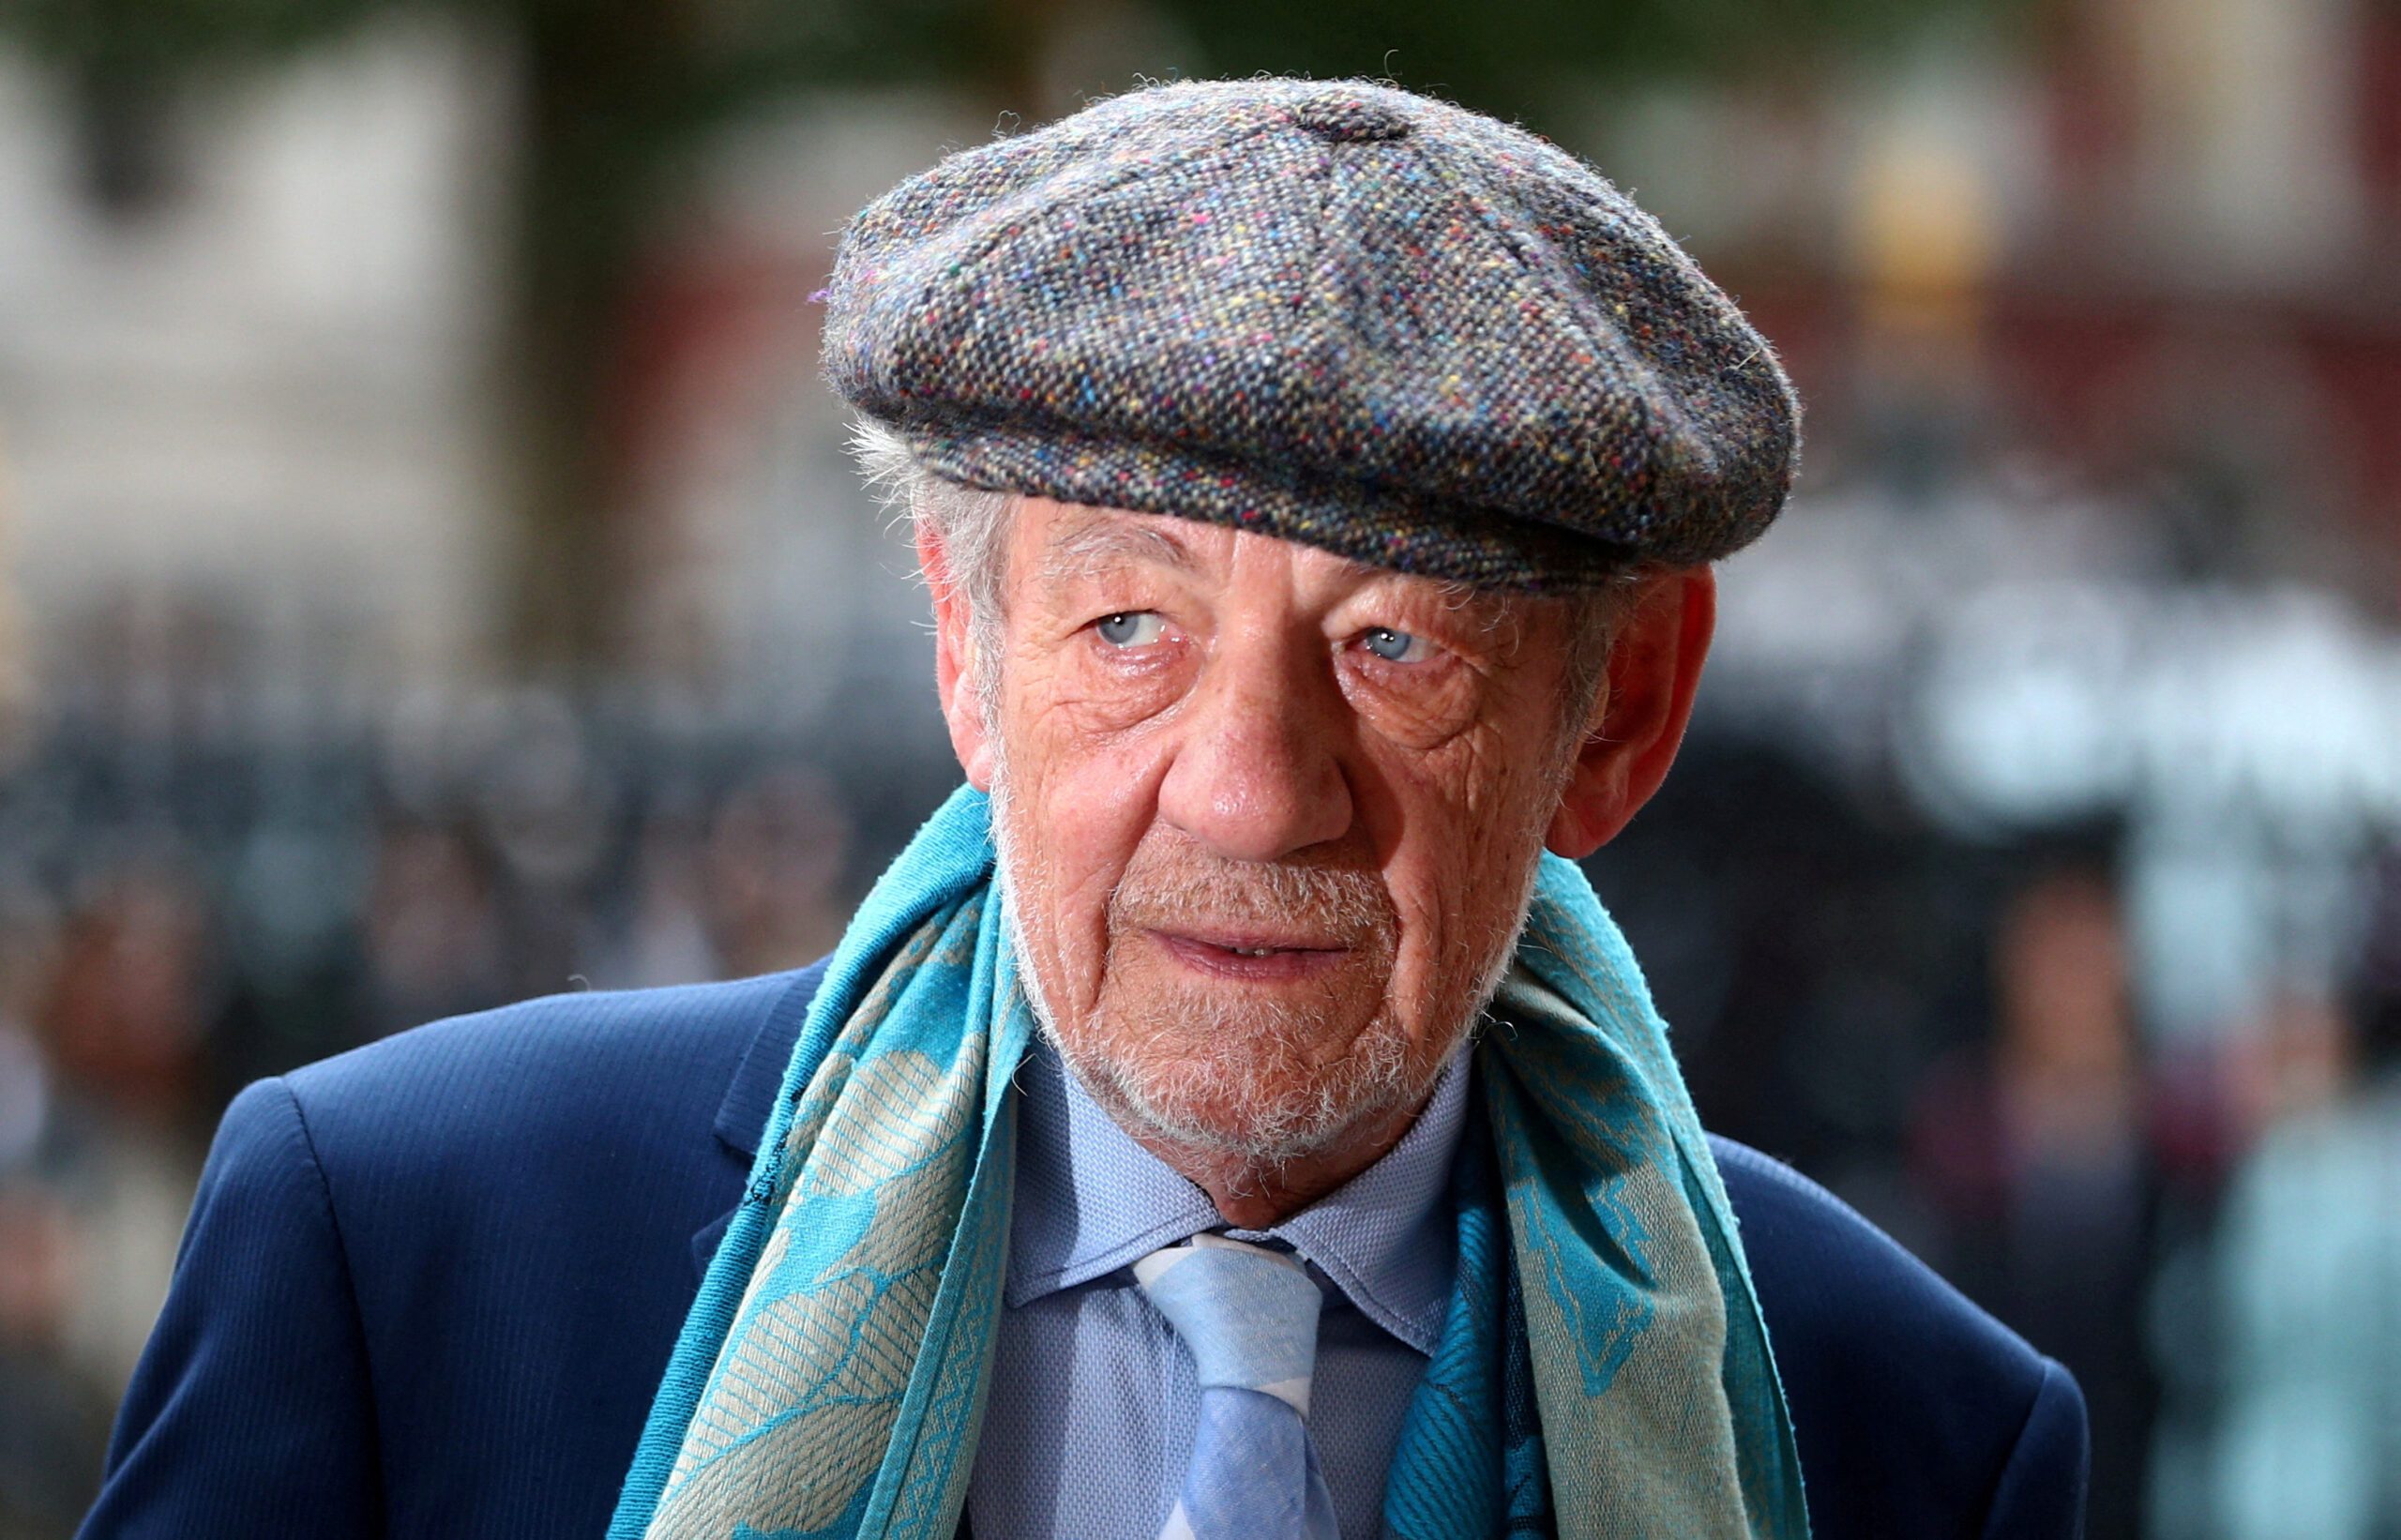 Ian McKellen will not return to role after stage fall